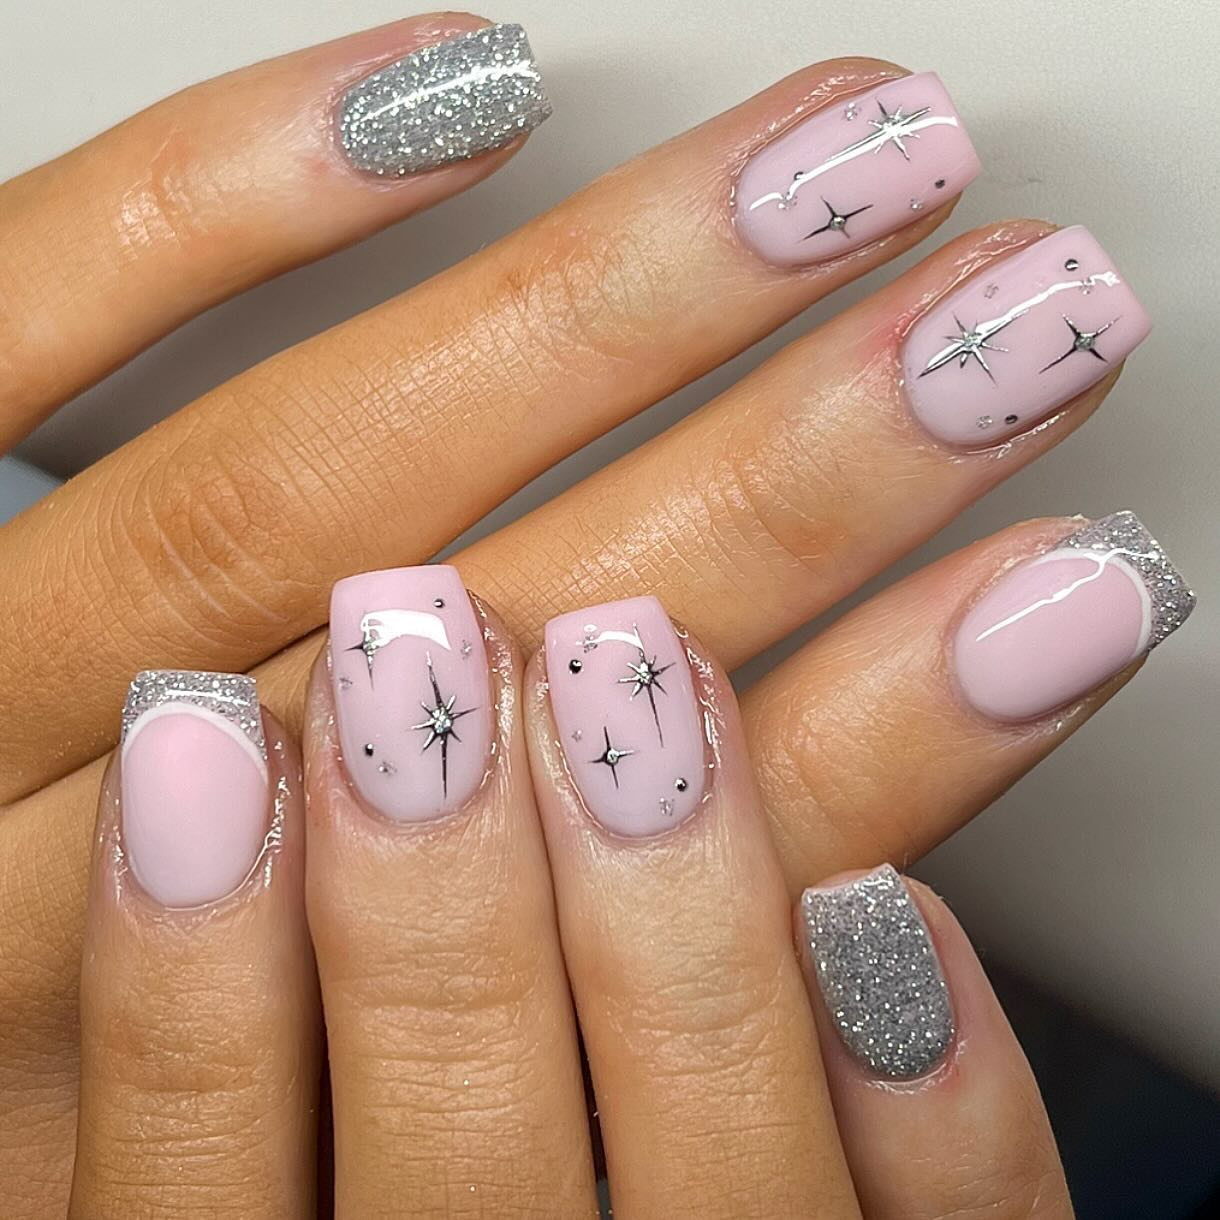 33 Best Silver Glitter French Tip Nails To Try